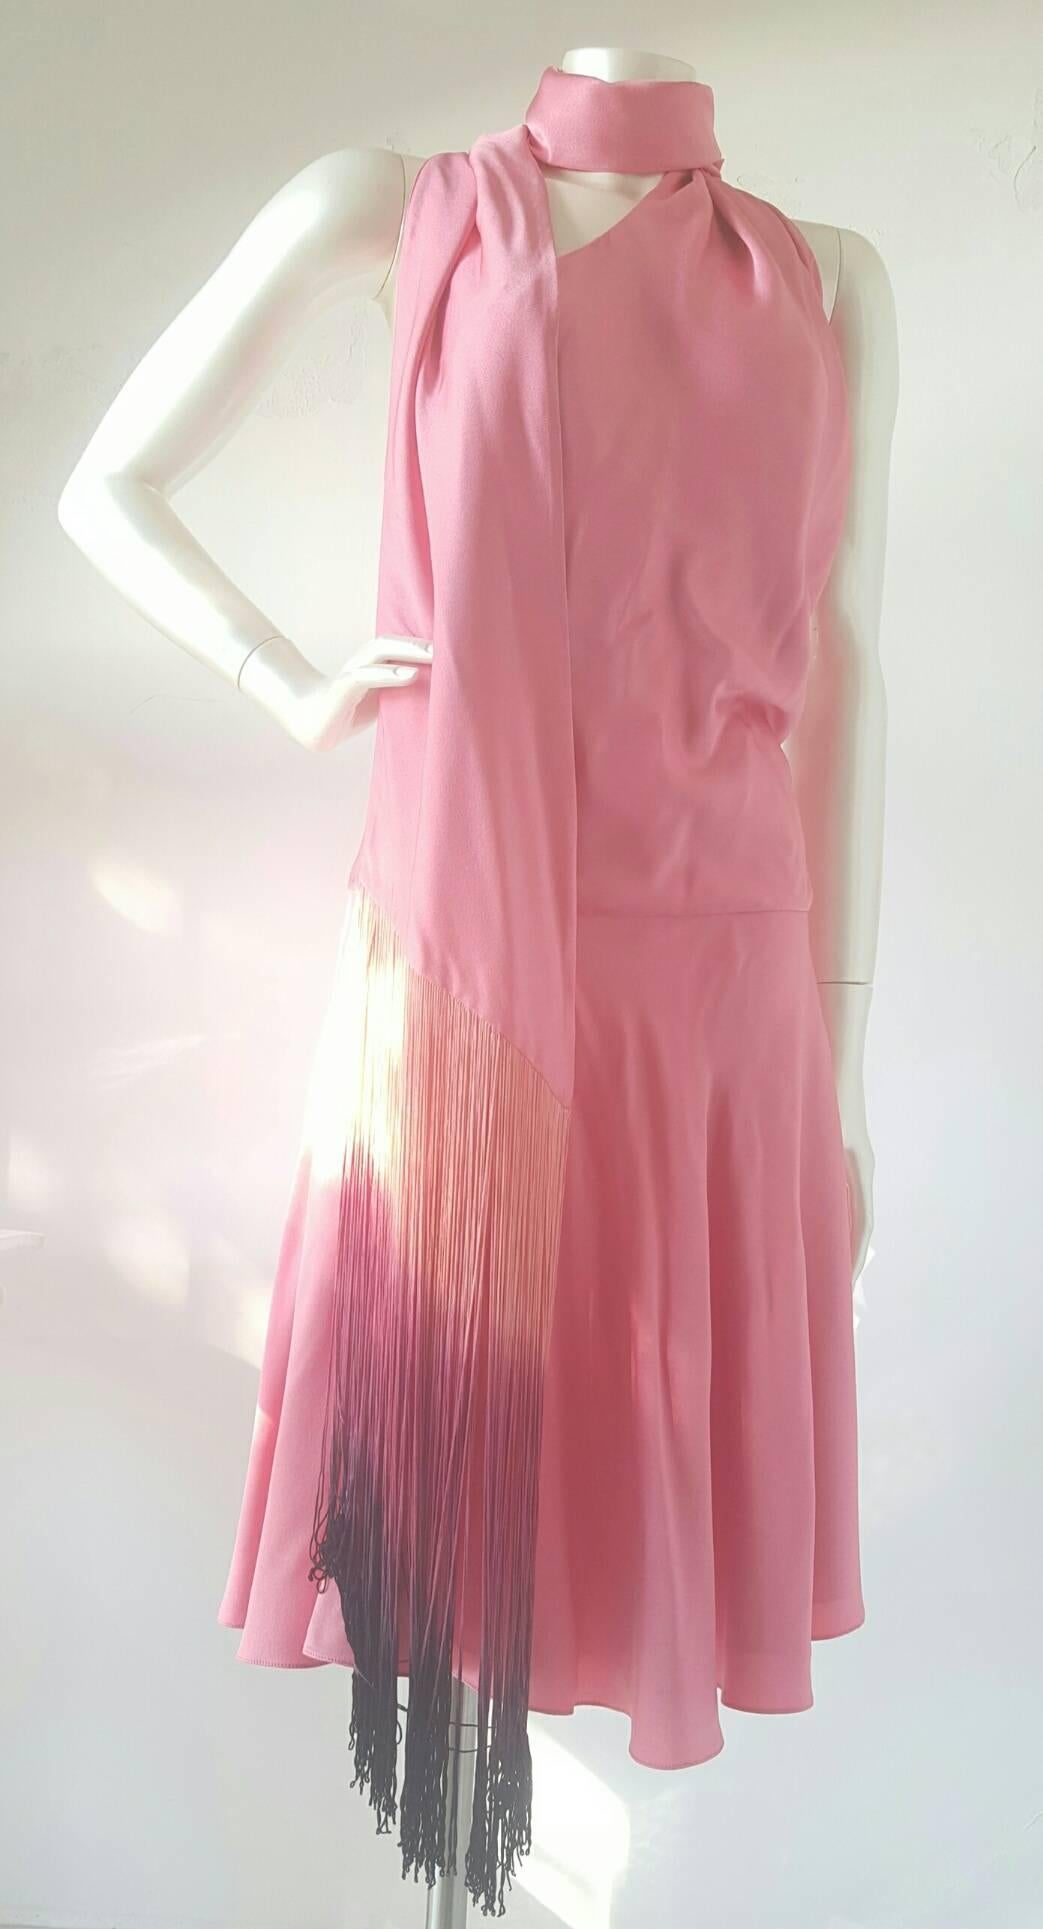 Pink 1990s Alexander McQueen pink dress with fringes